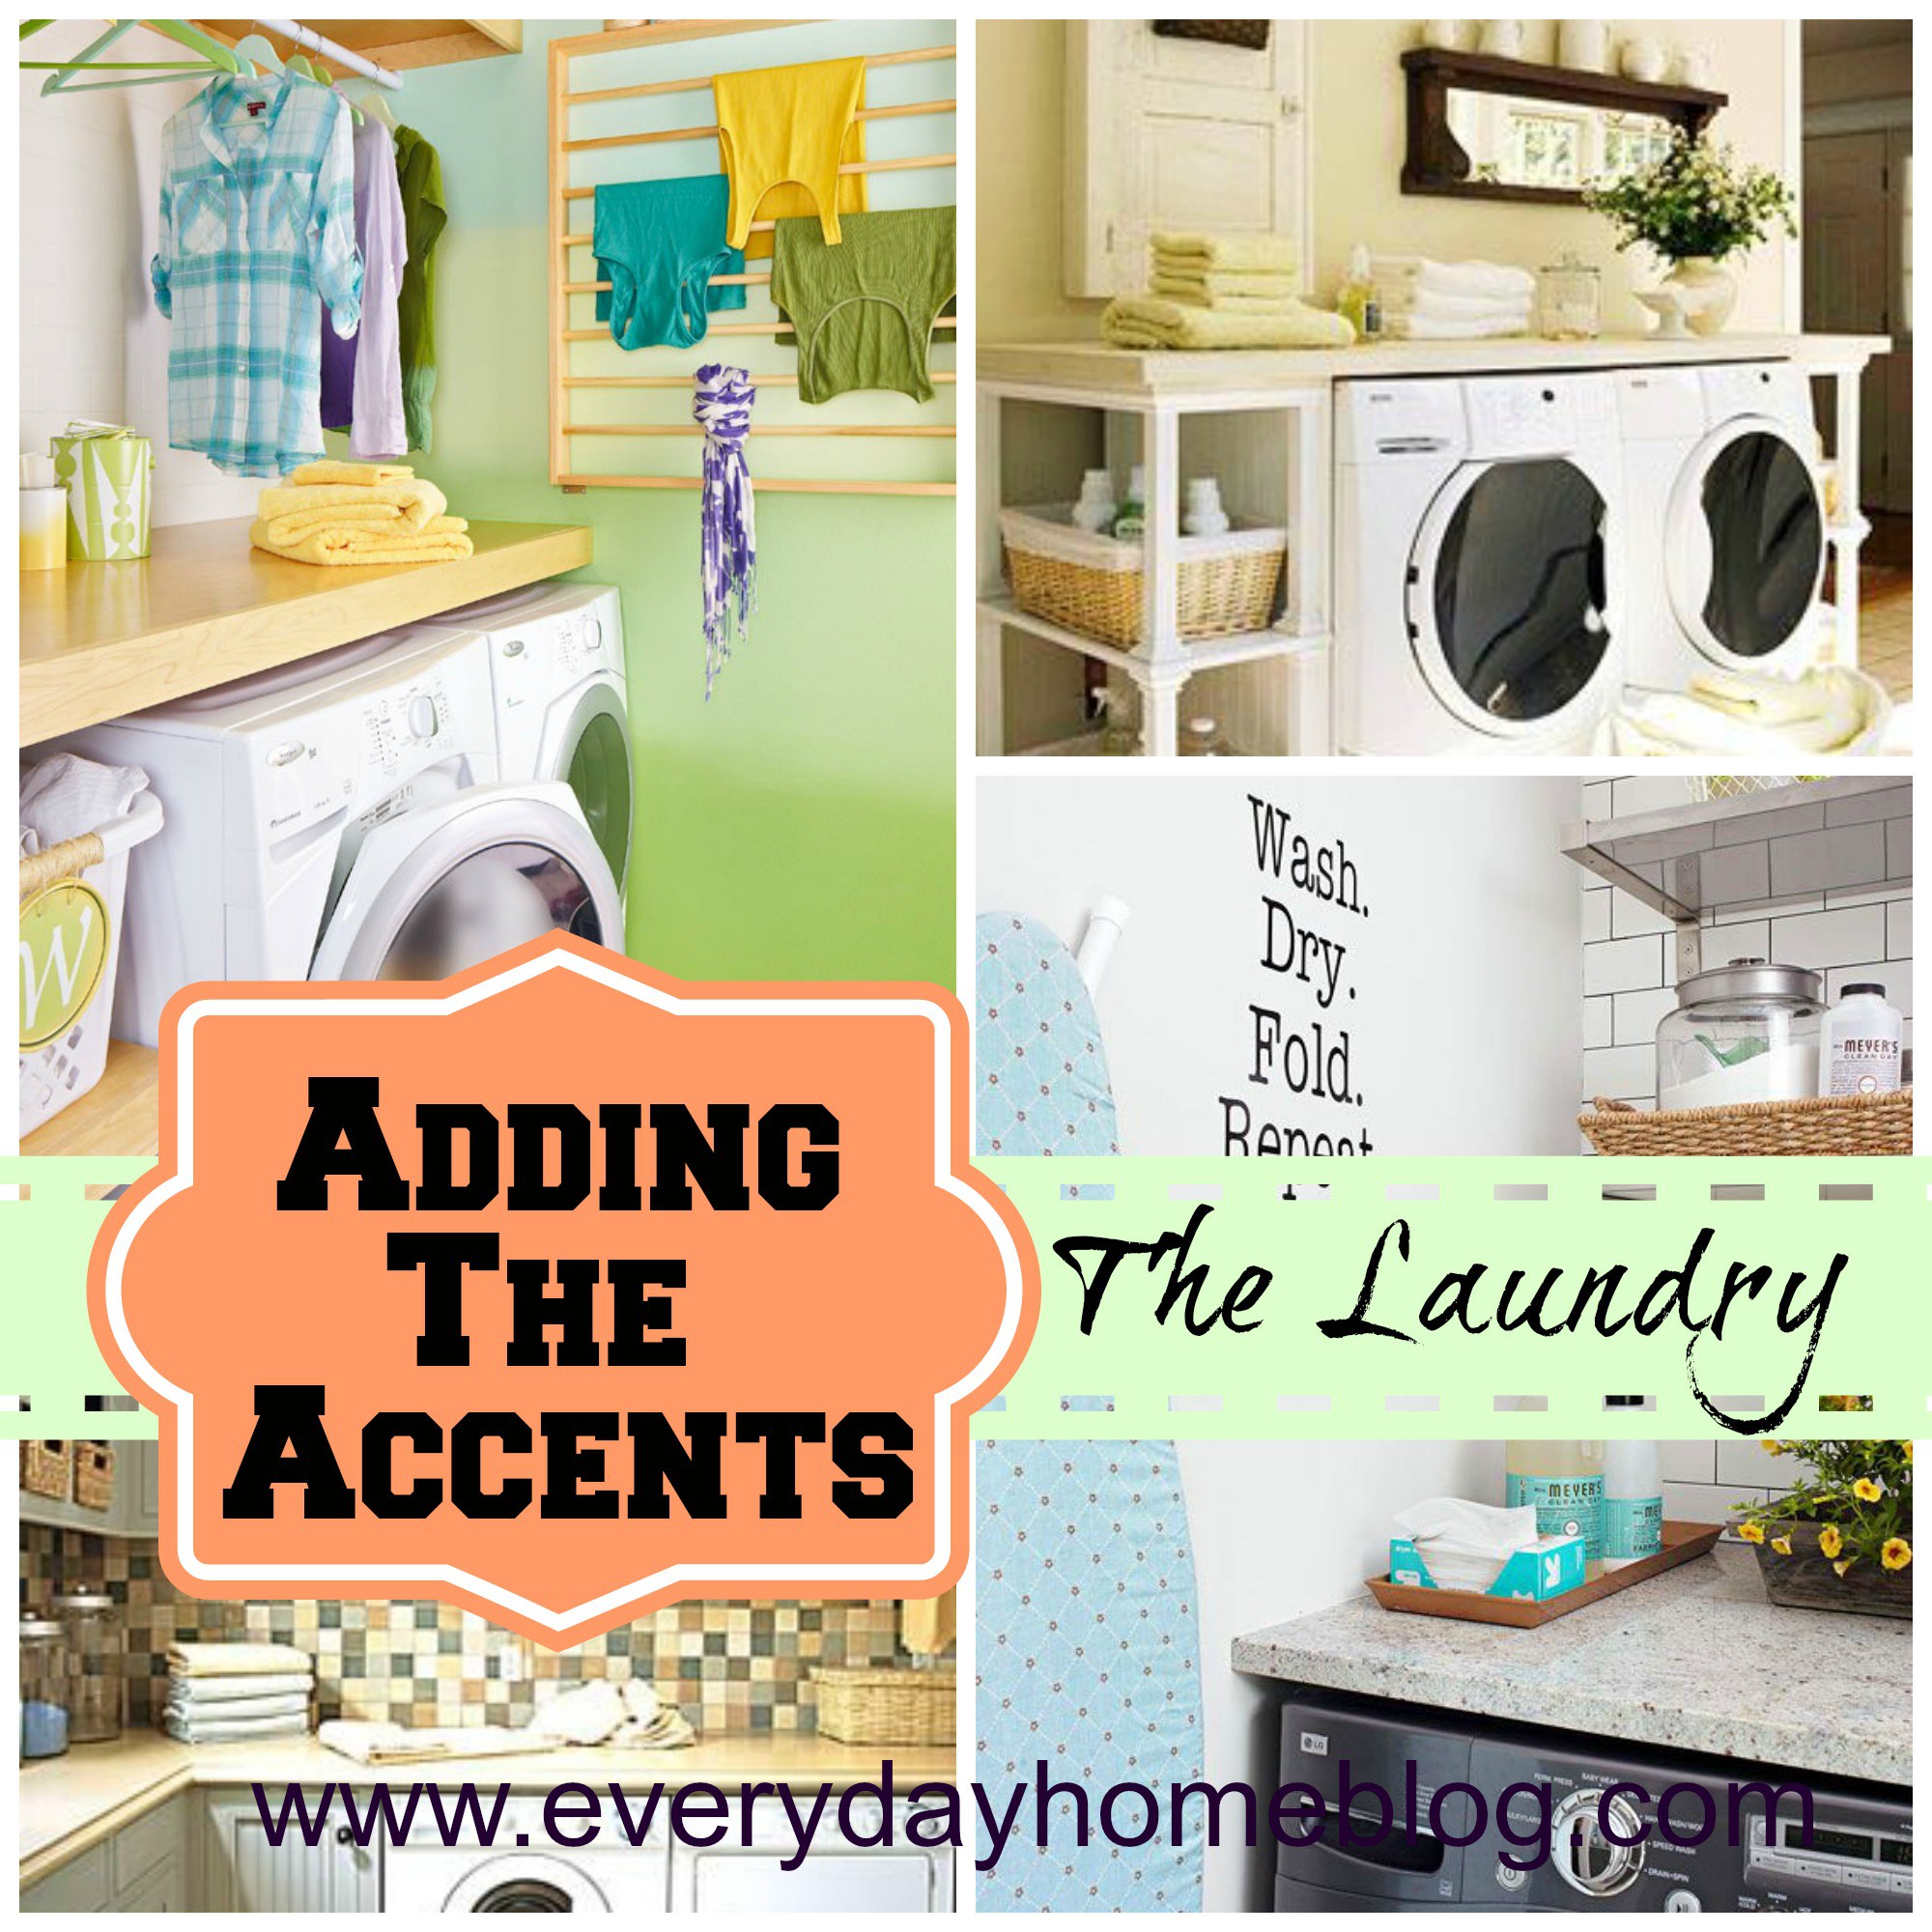 adding-accents-laundry